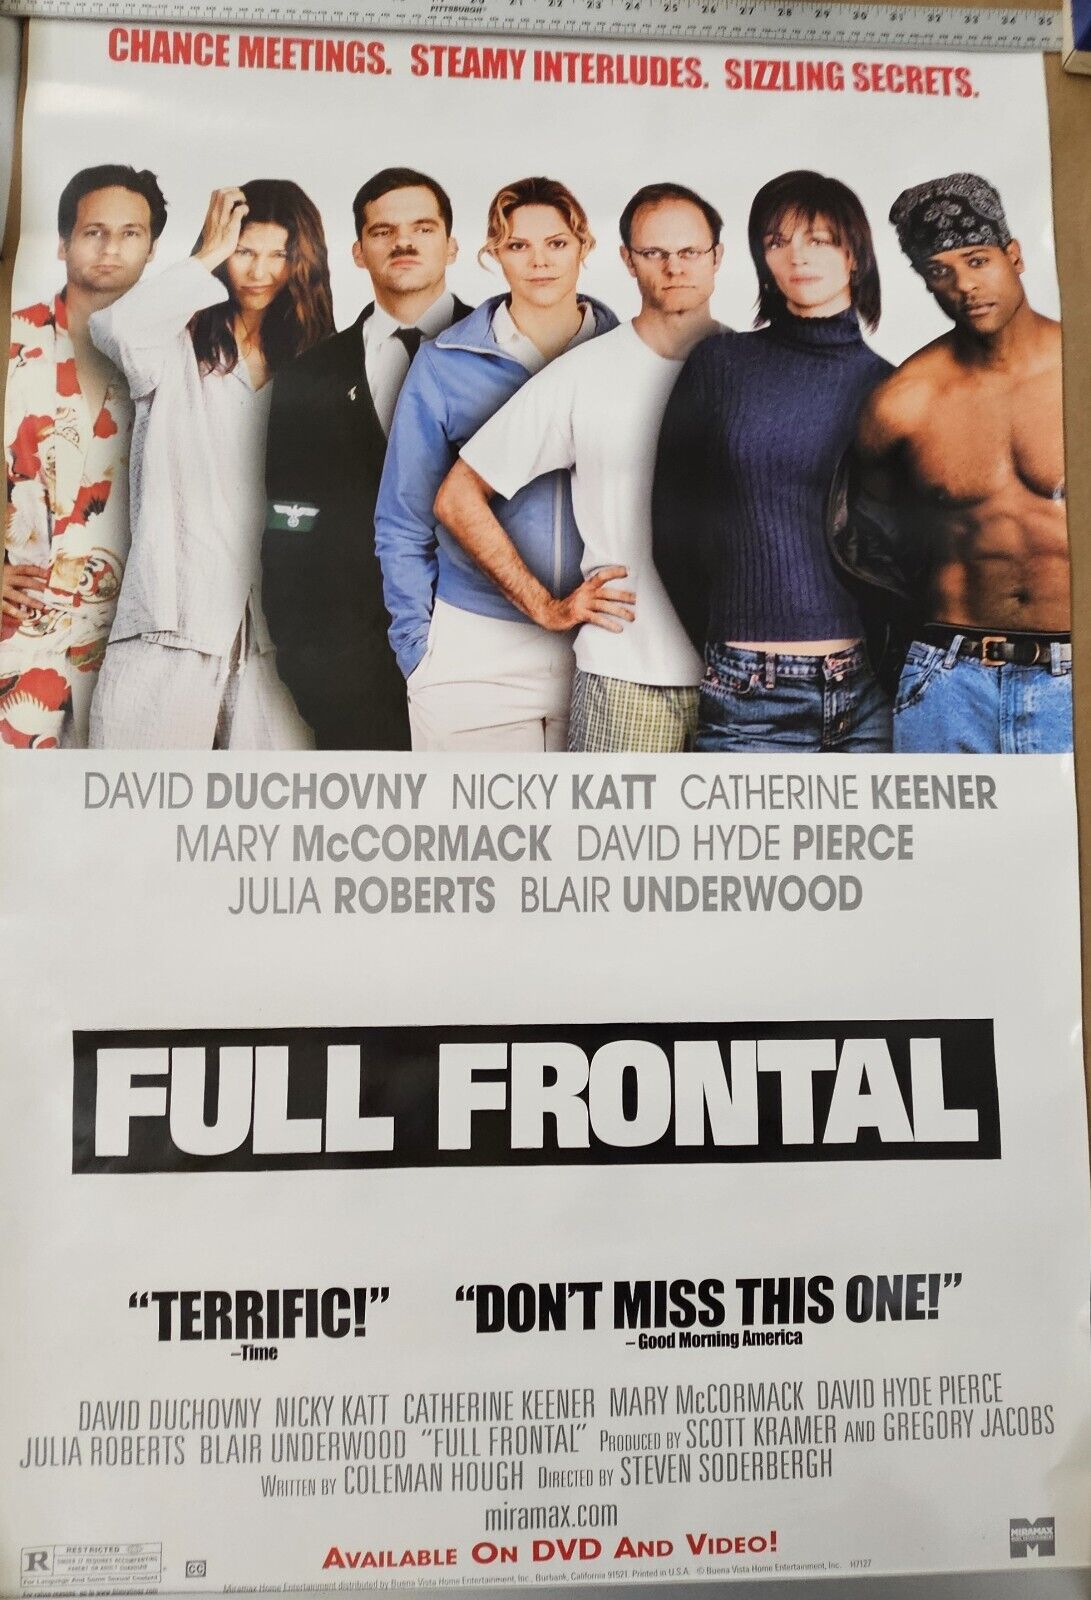 David Duchovny  Julia Roberts in FULL FRONTAL 26 x 39.75  DVD  Movie poster